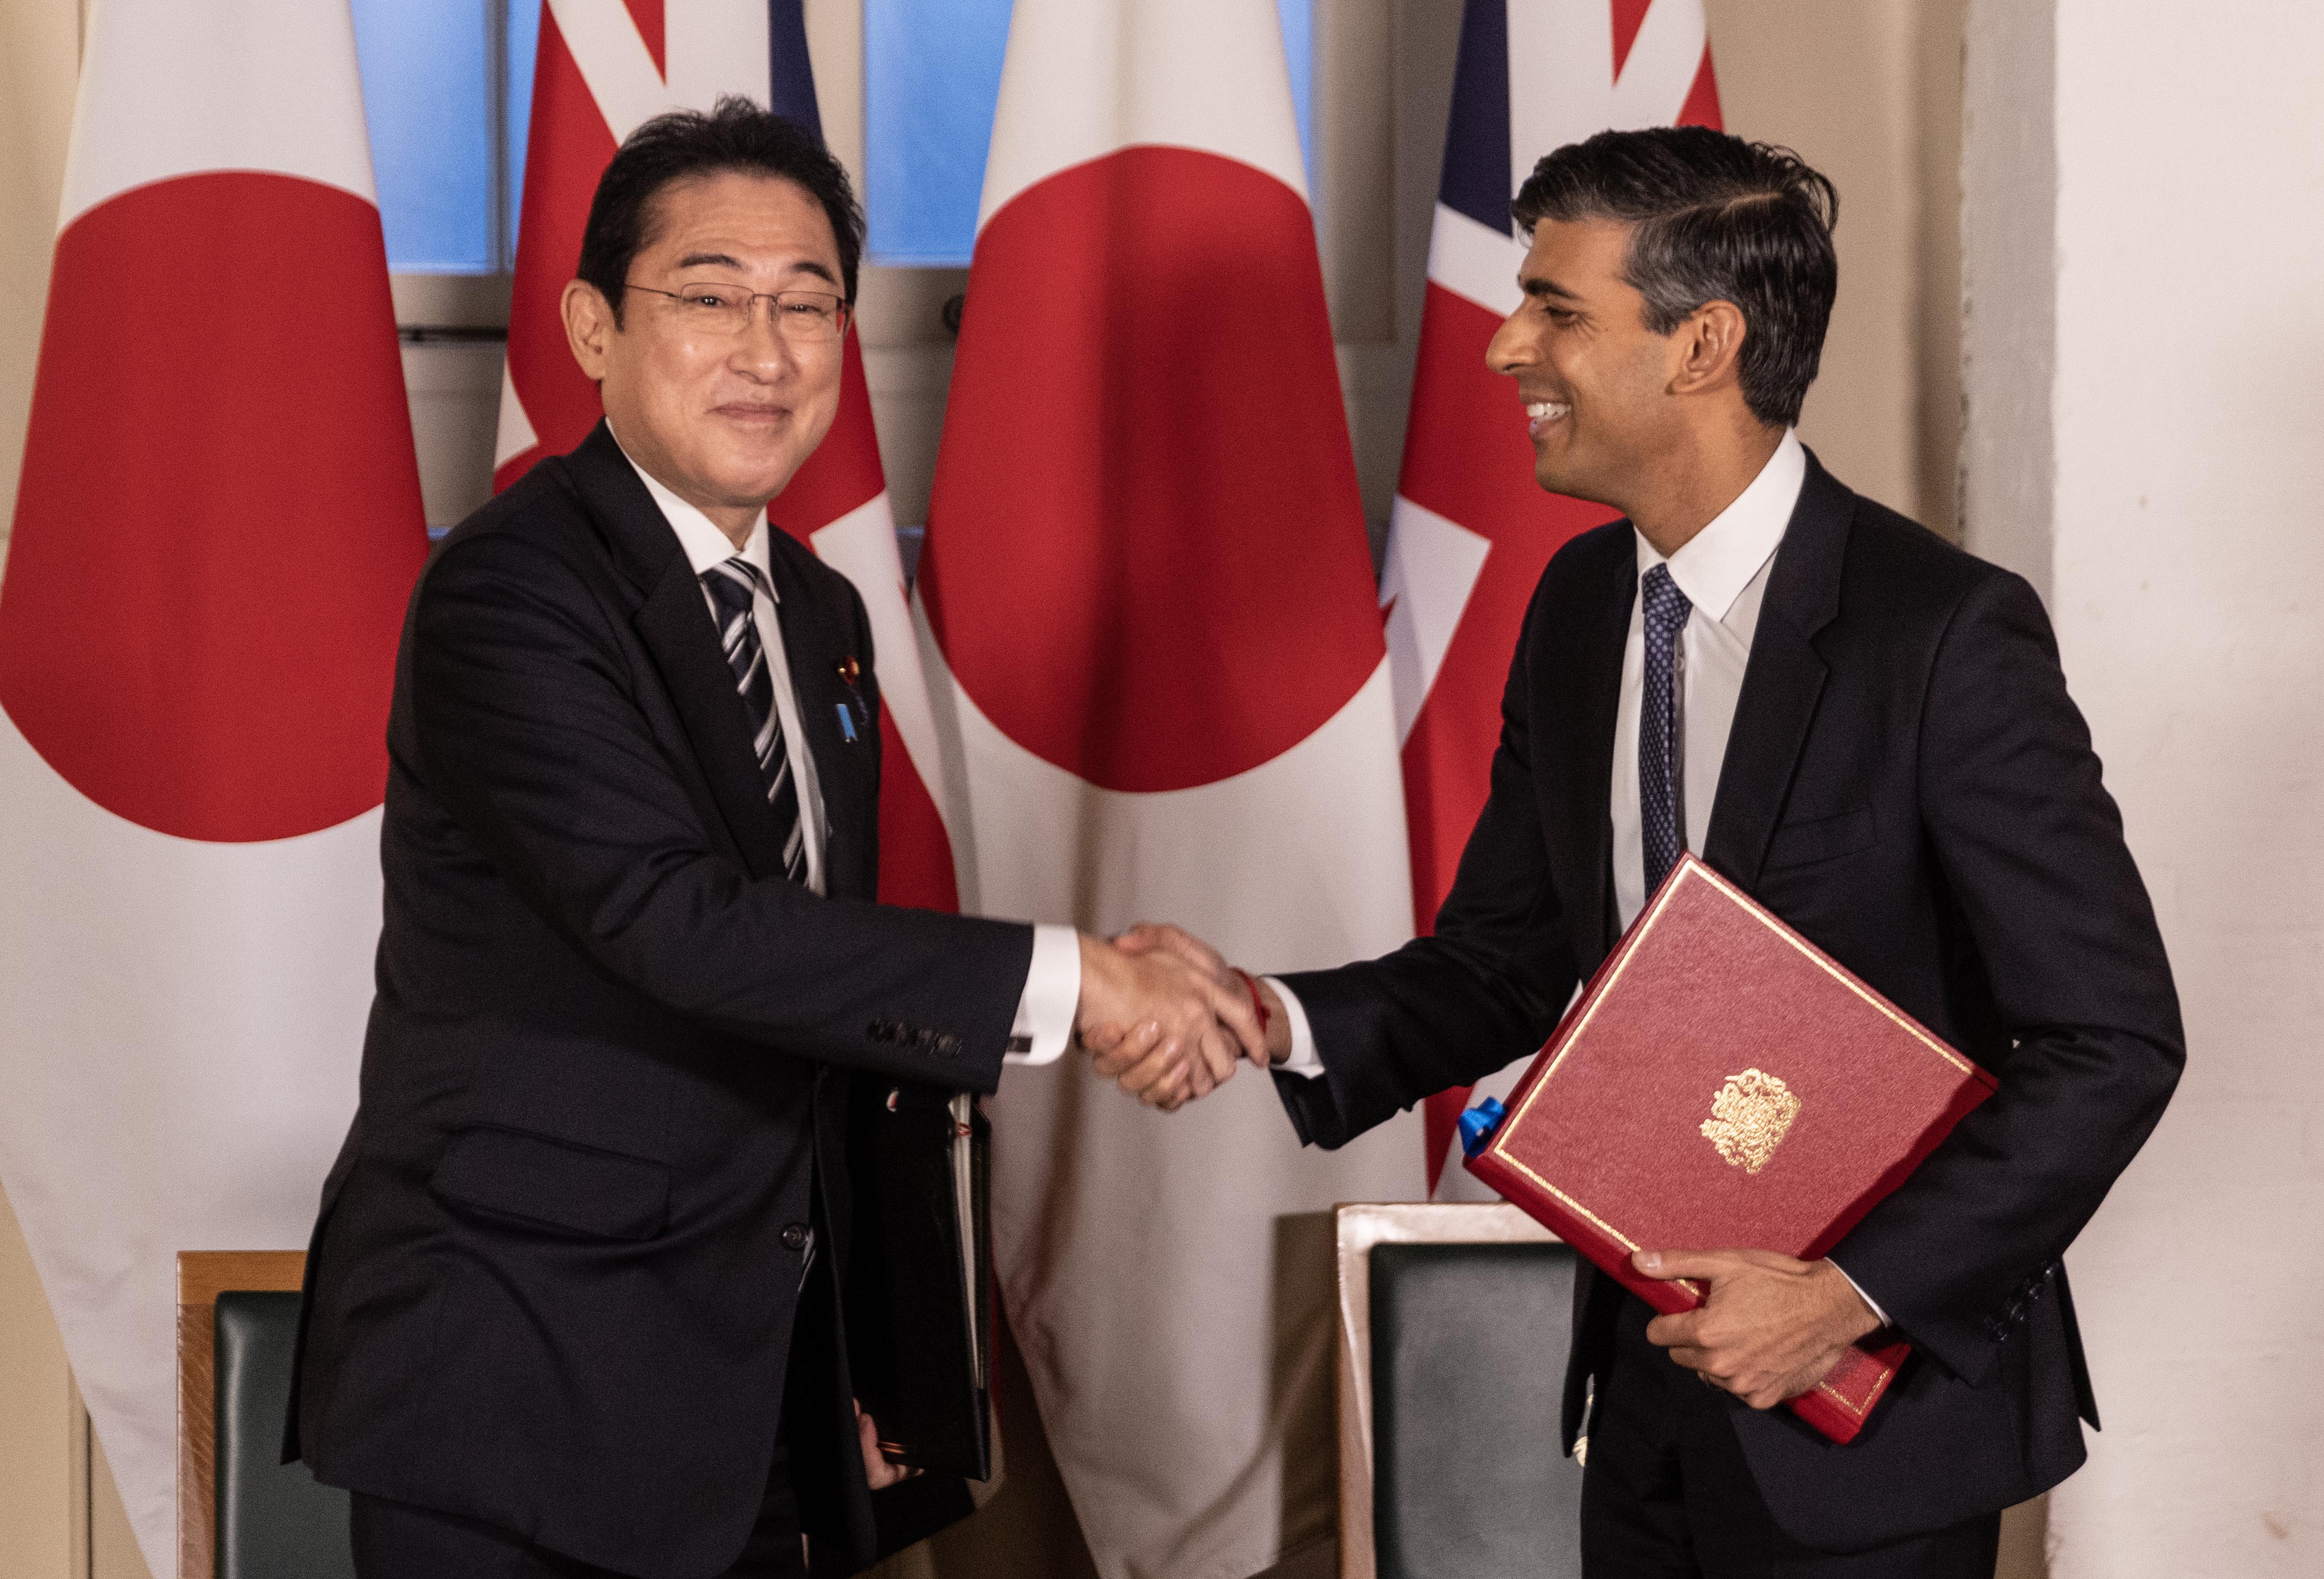 January, 2023: Rishi shakes hands with Japanese PM Fumio Kishida after signing a joint defence agreement at the Tower of London